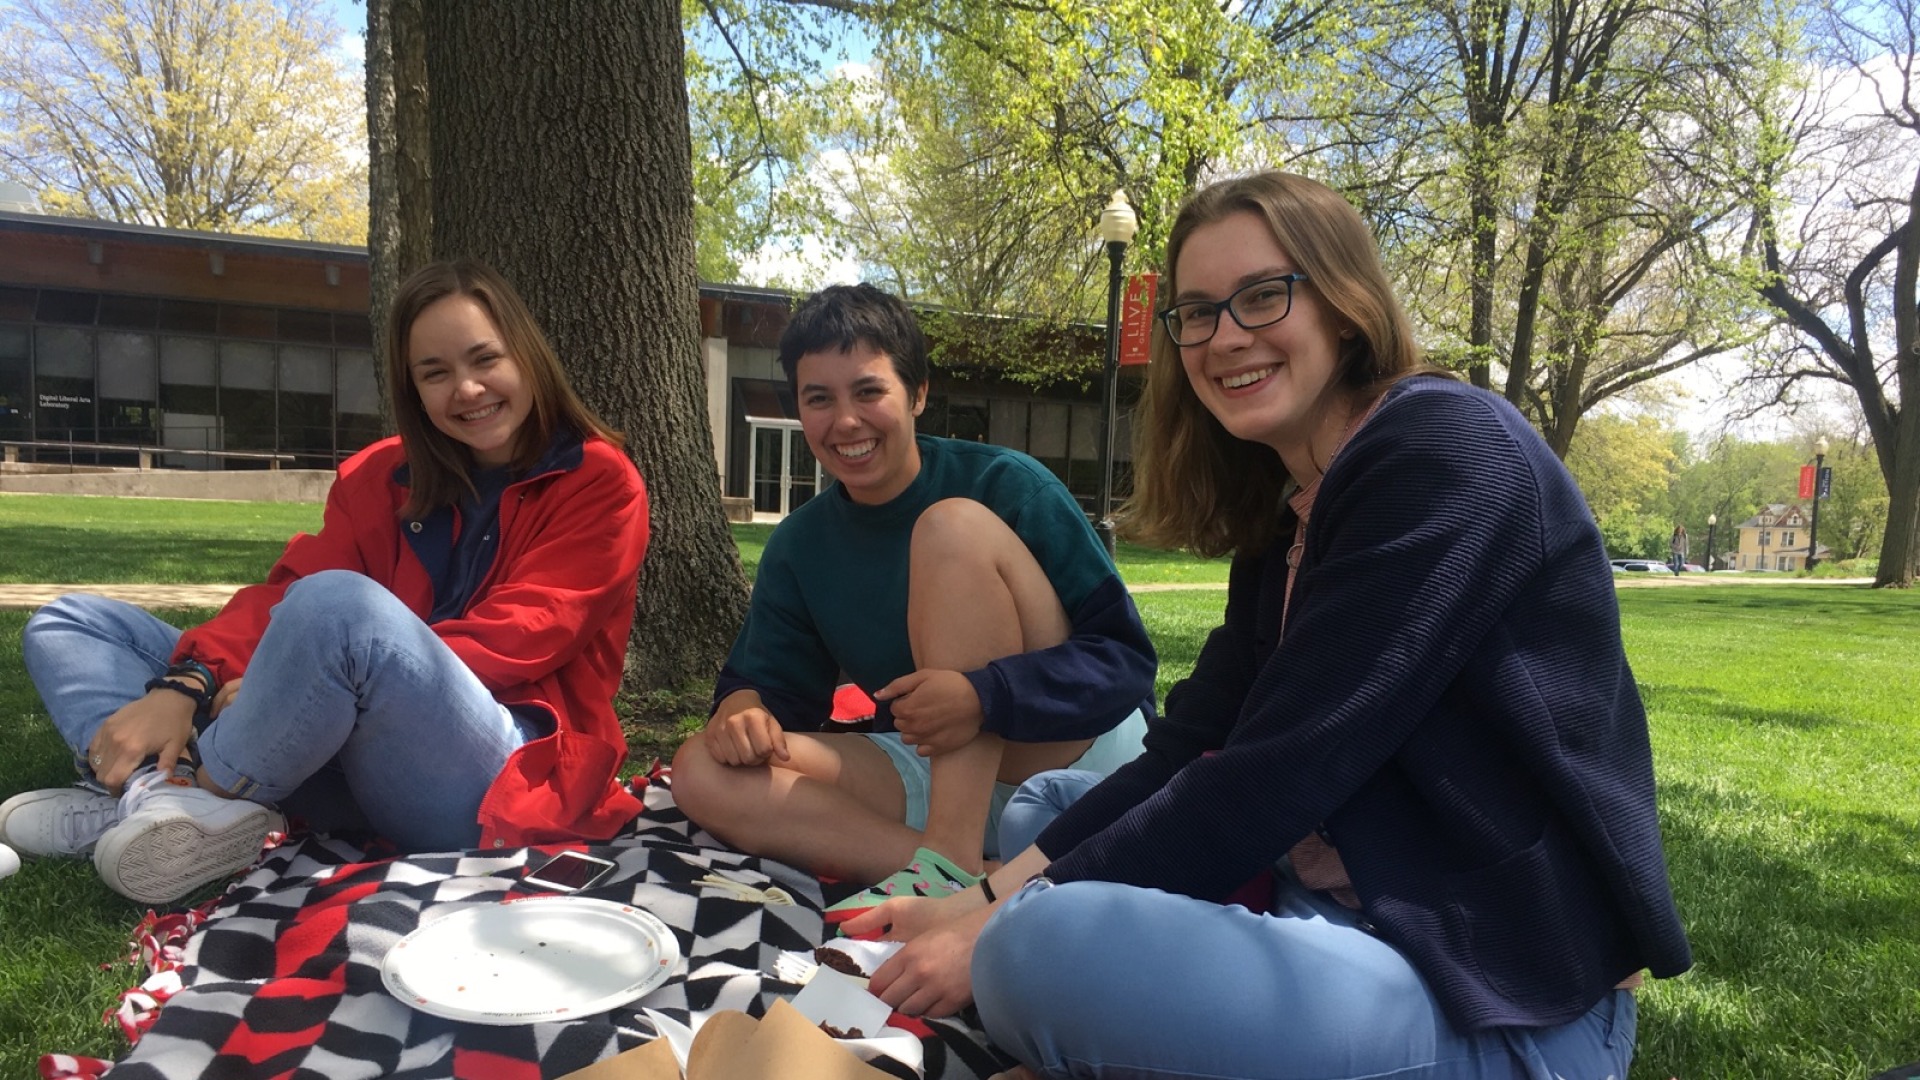 Three students share a chocolate bundt cake while sitting on a blanket in the grass